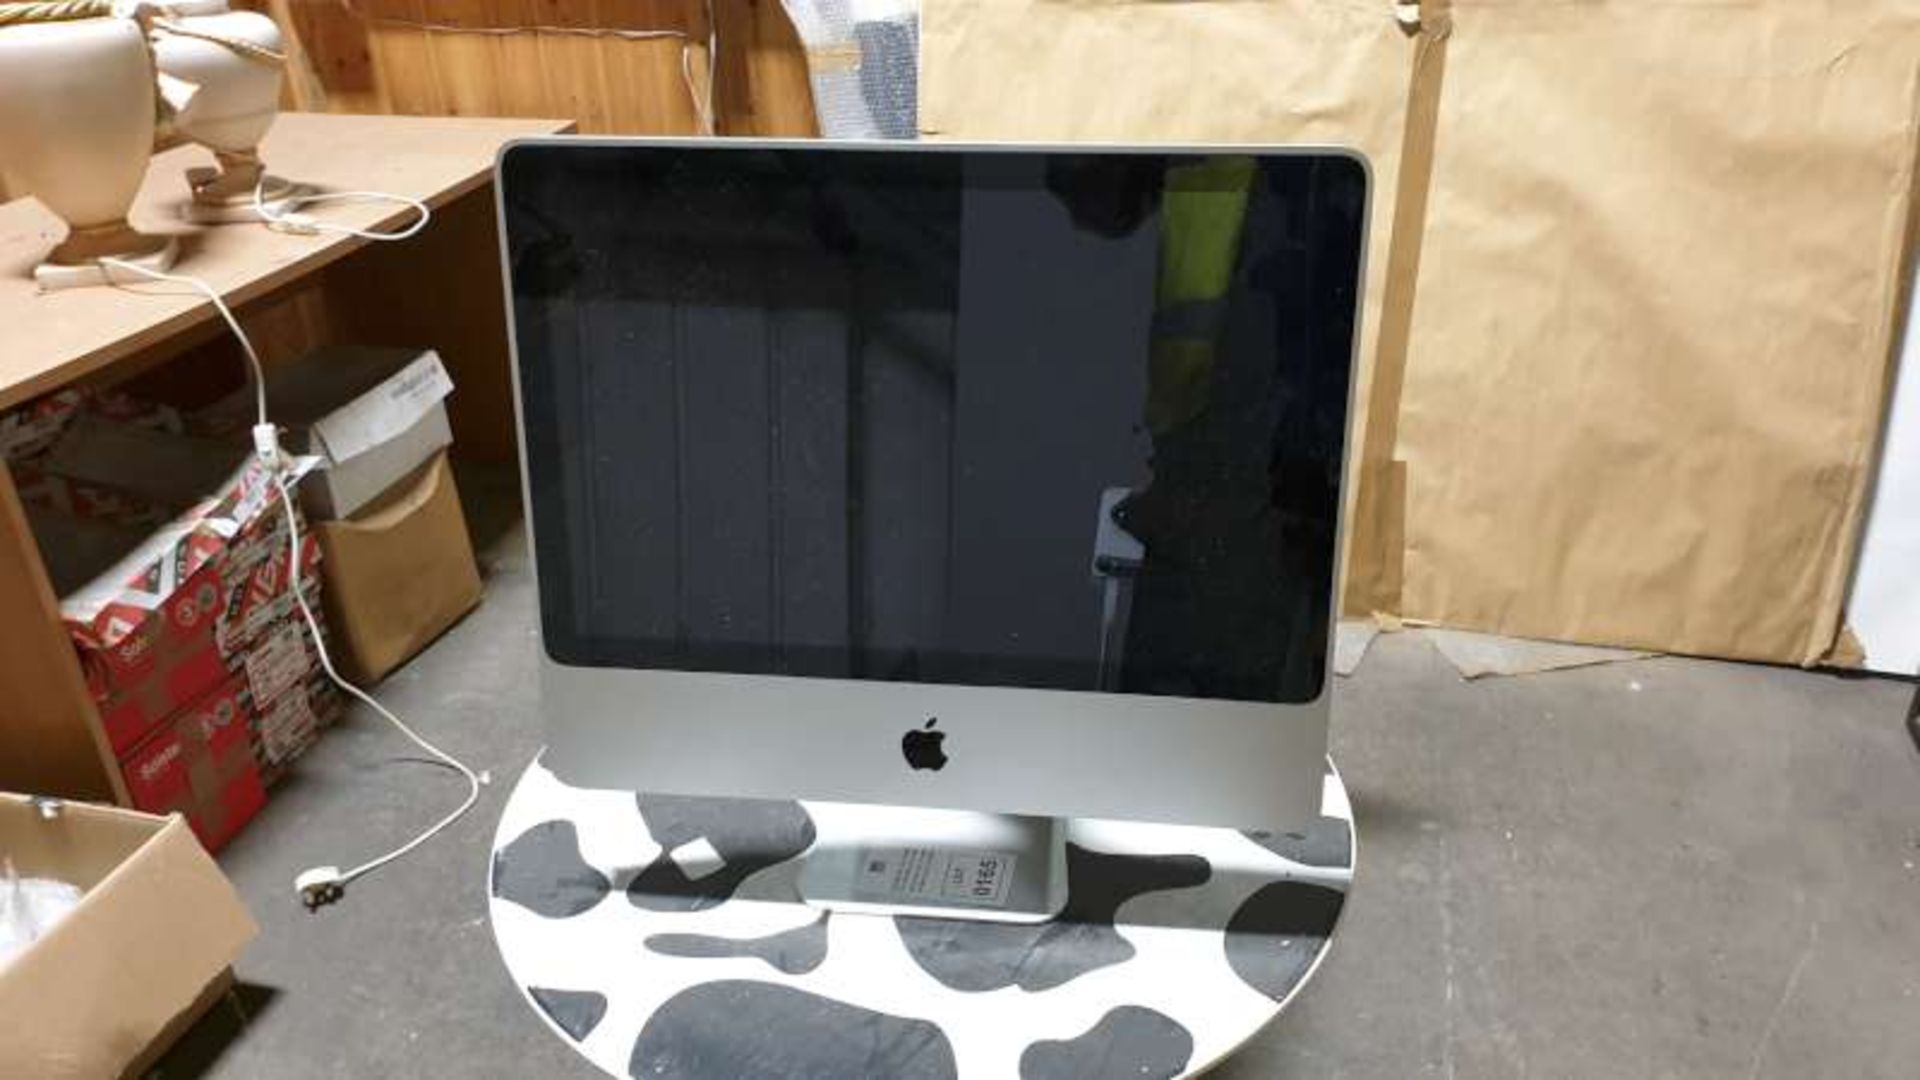 IMAC 9.1 CORE2DUO 2.0GHZ HARD DRIVE 160GB MEMORY 4GB SERIAL NO. H092684F6MH 3 MONTHS WARRANTY